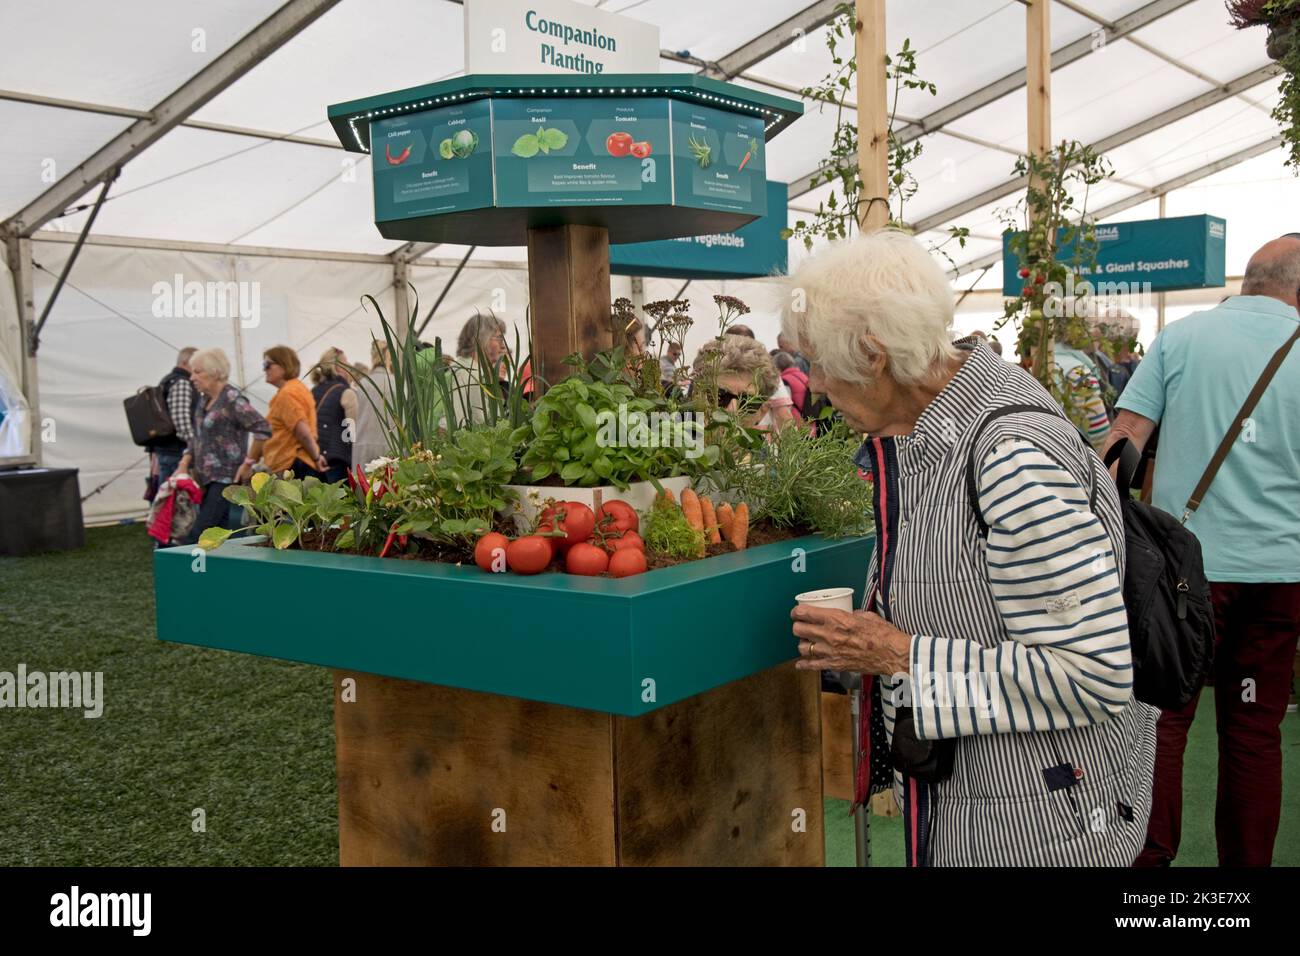 Visitor looking at display of companion planting vegetables at Canna exhibit at Three Counties Showground, Great Malvern, UK Stock Photo